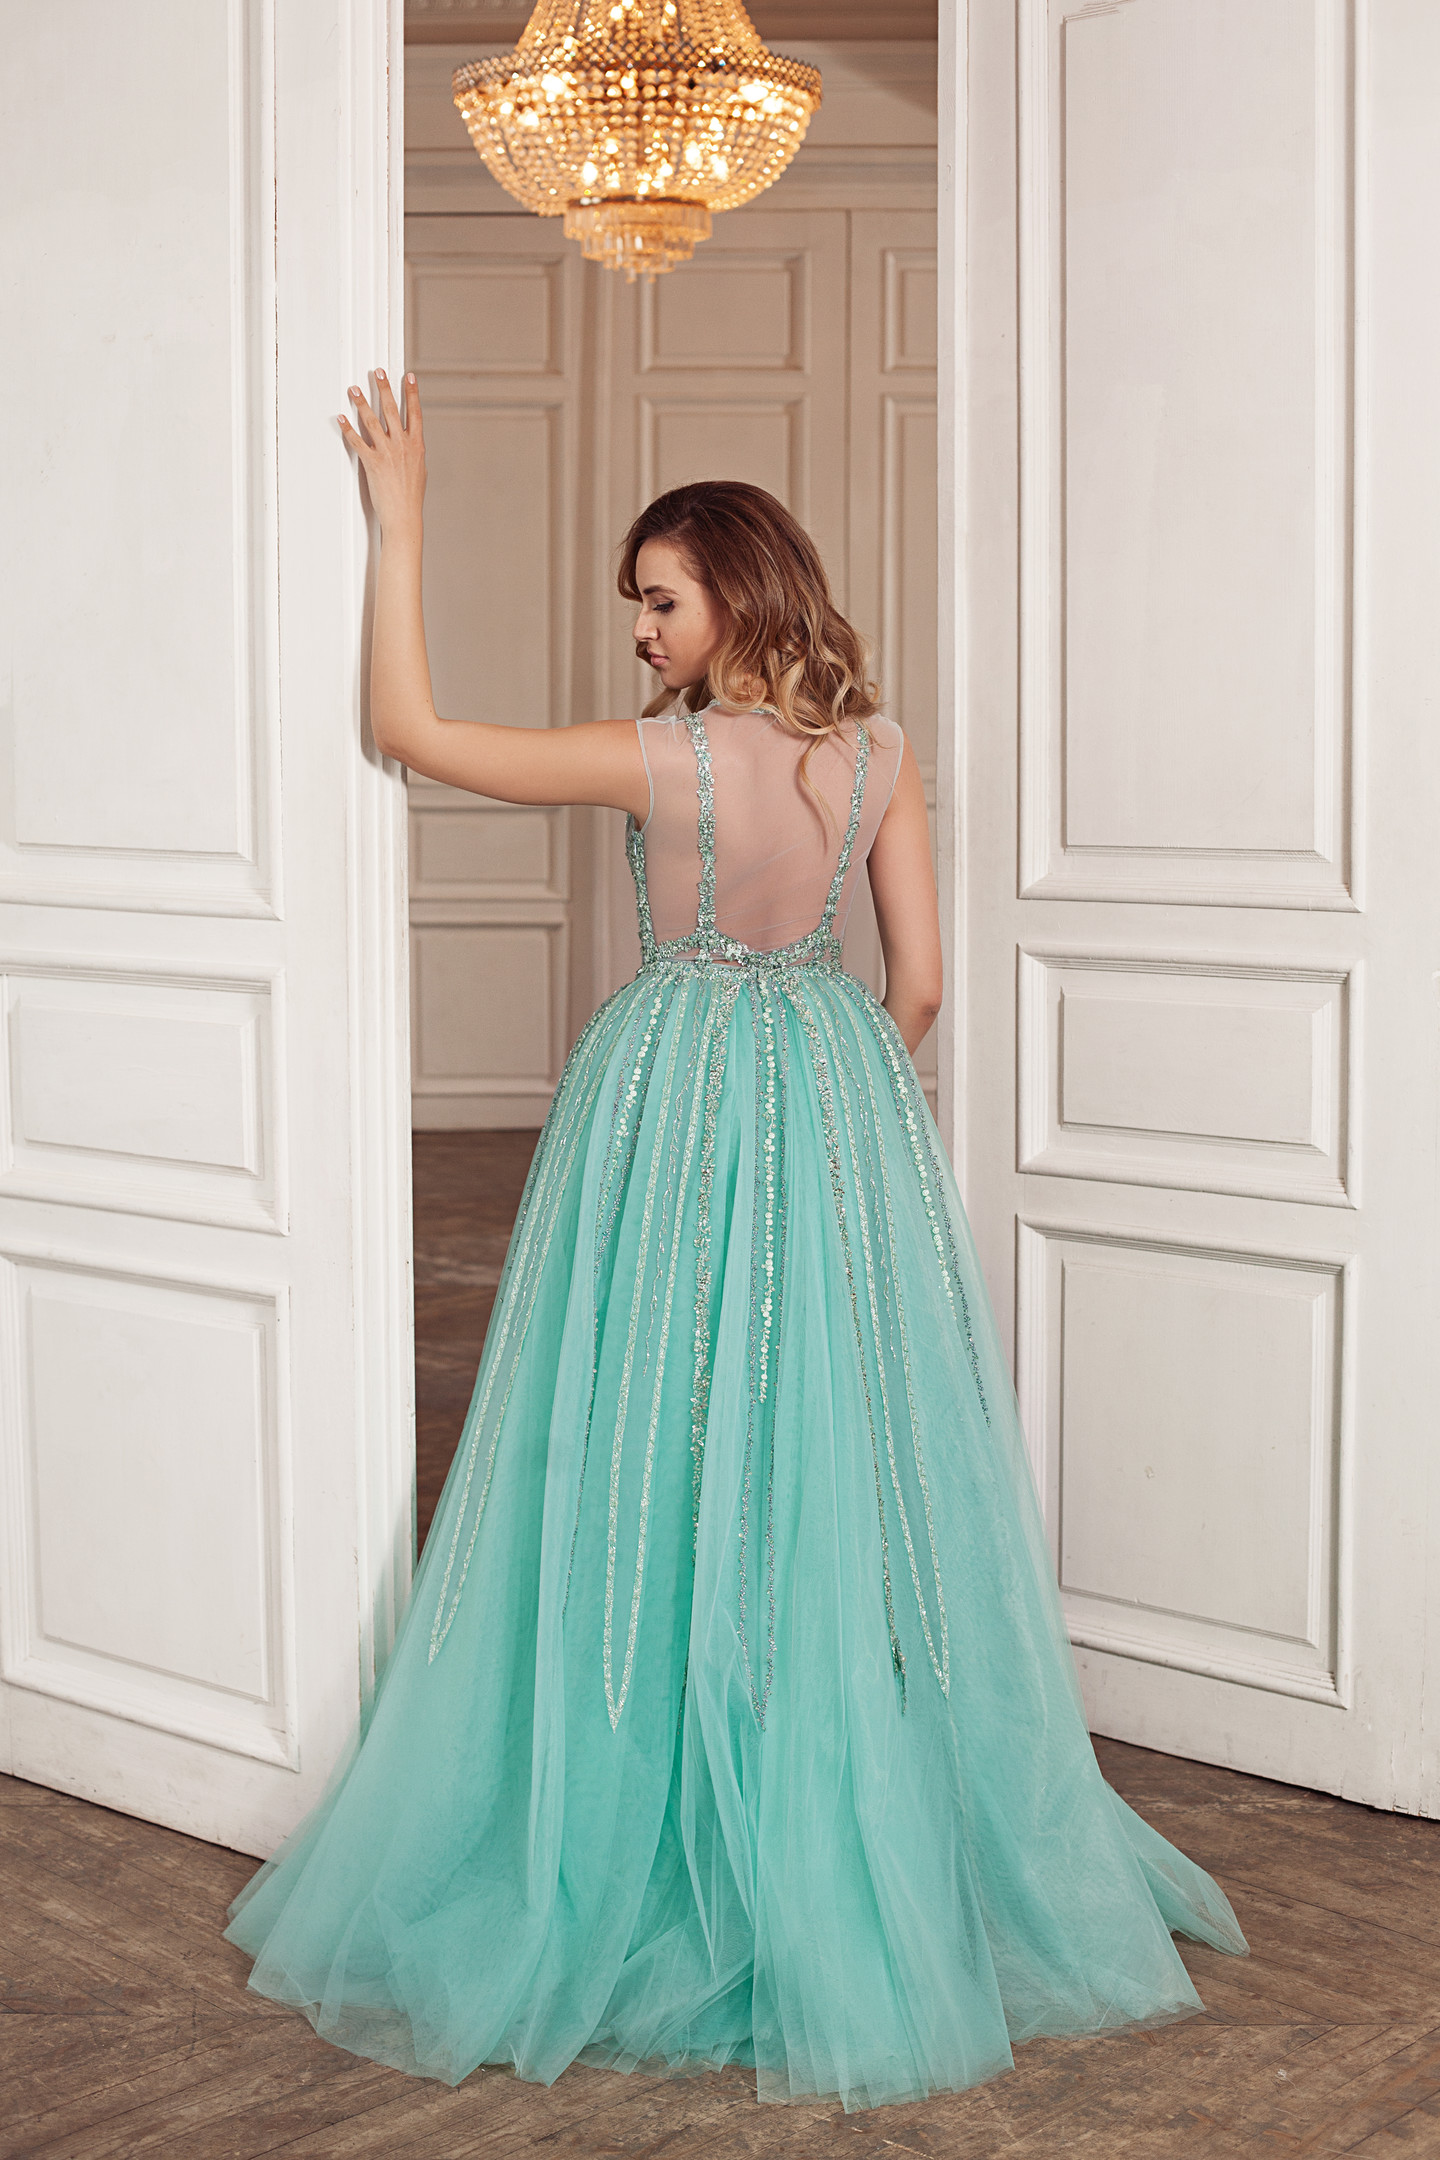 Yulali gown, 2018, couture, dress, evening, green, lace, detachable skirt, sheath silhouette, tulle, archive